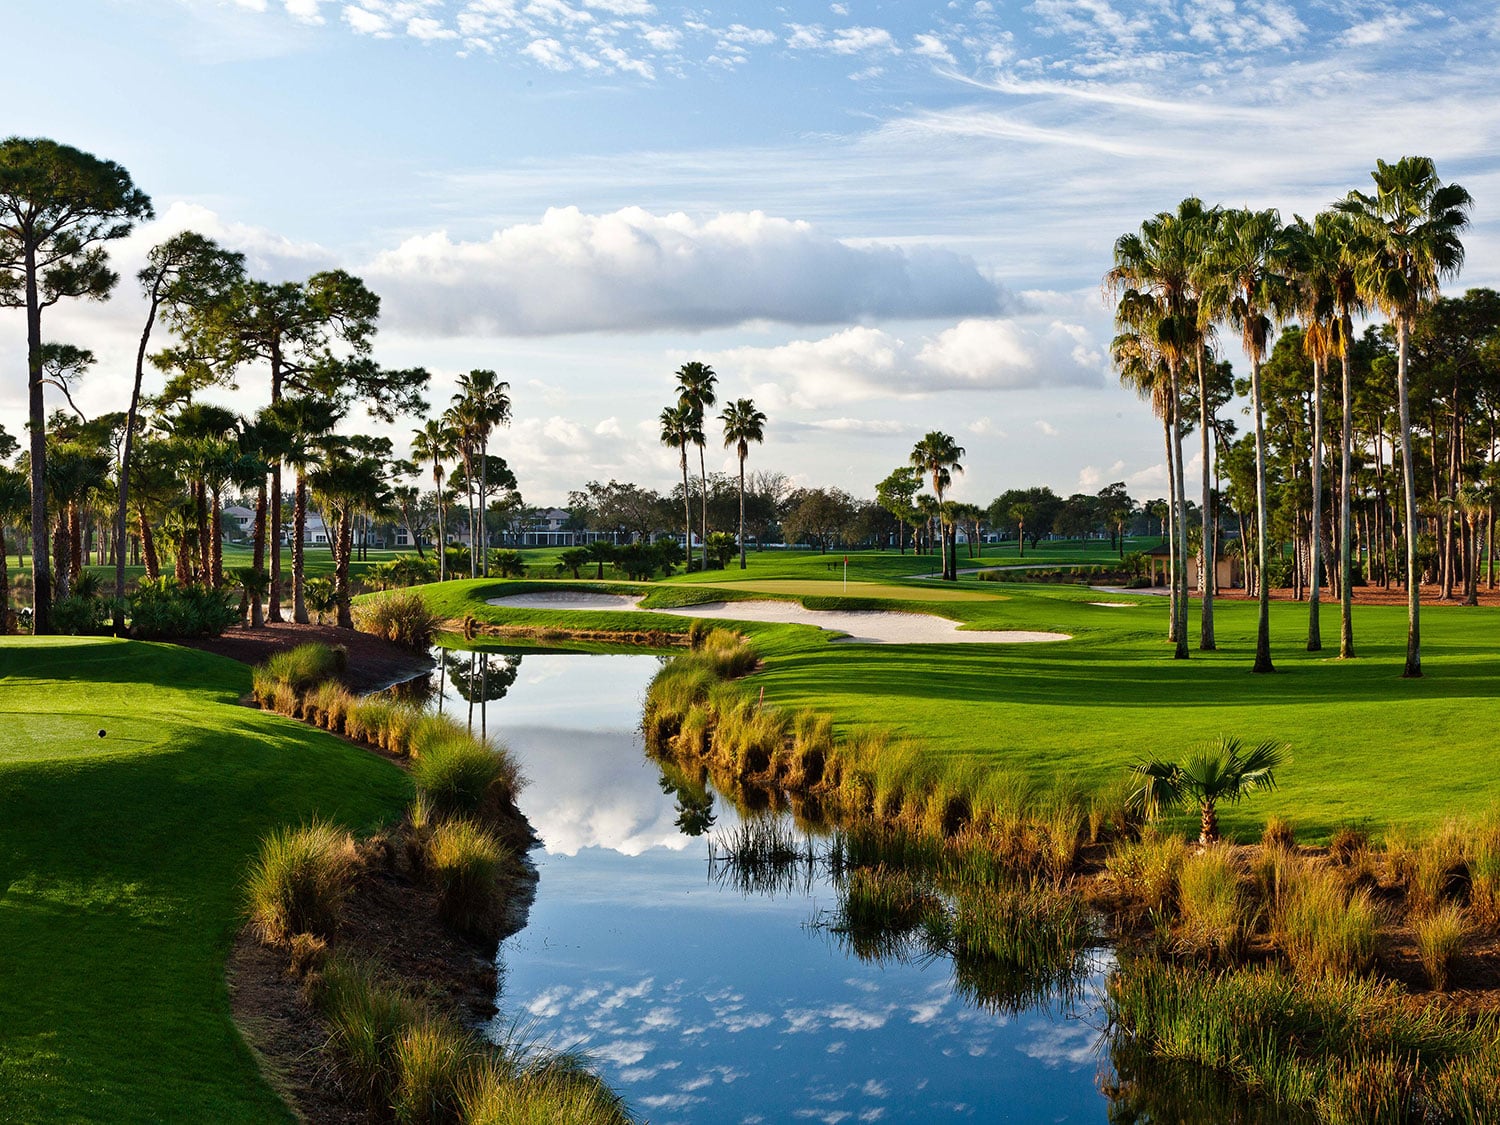 Hole 3 at The Champion golf course at the PGA National resort in Palm Beach Gardens, Florida.